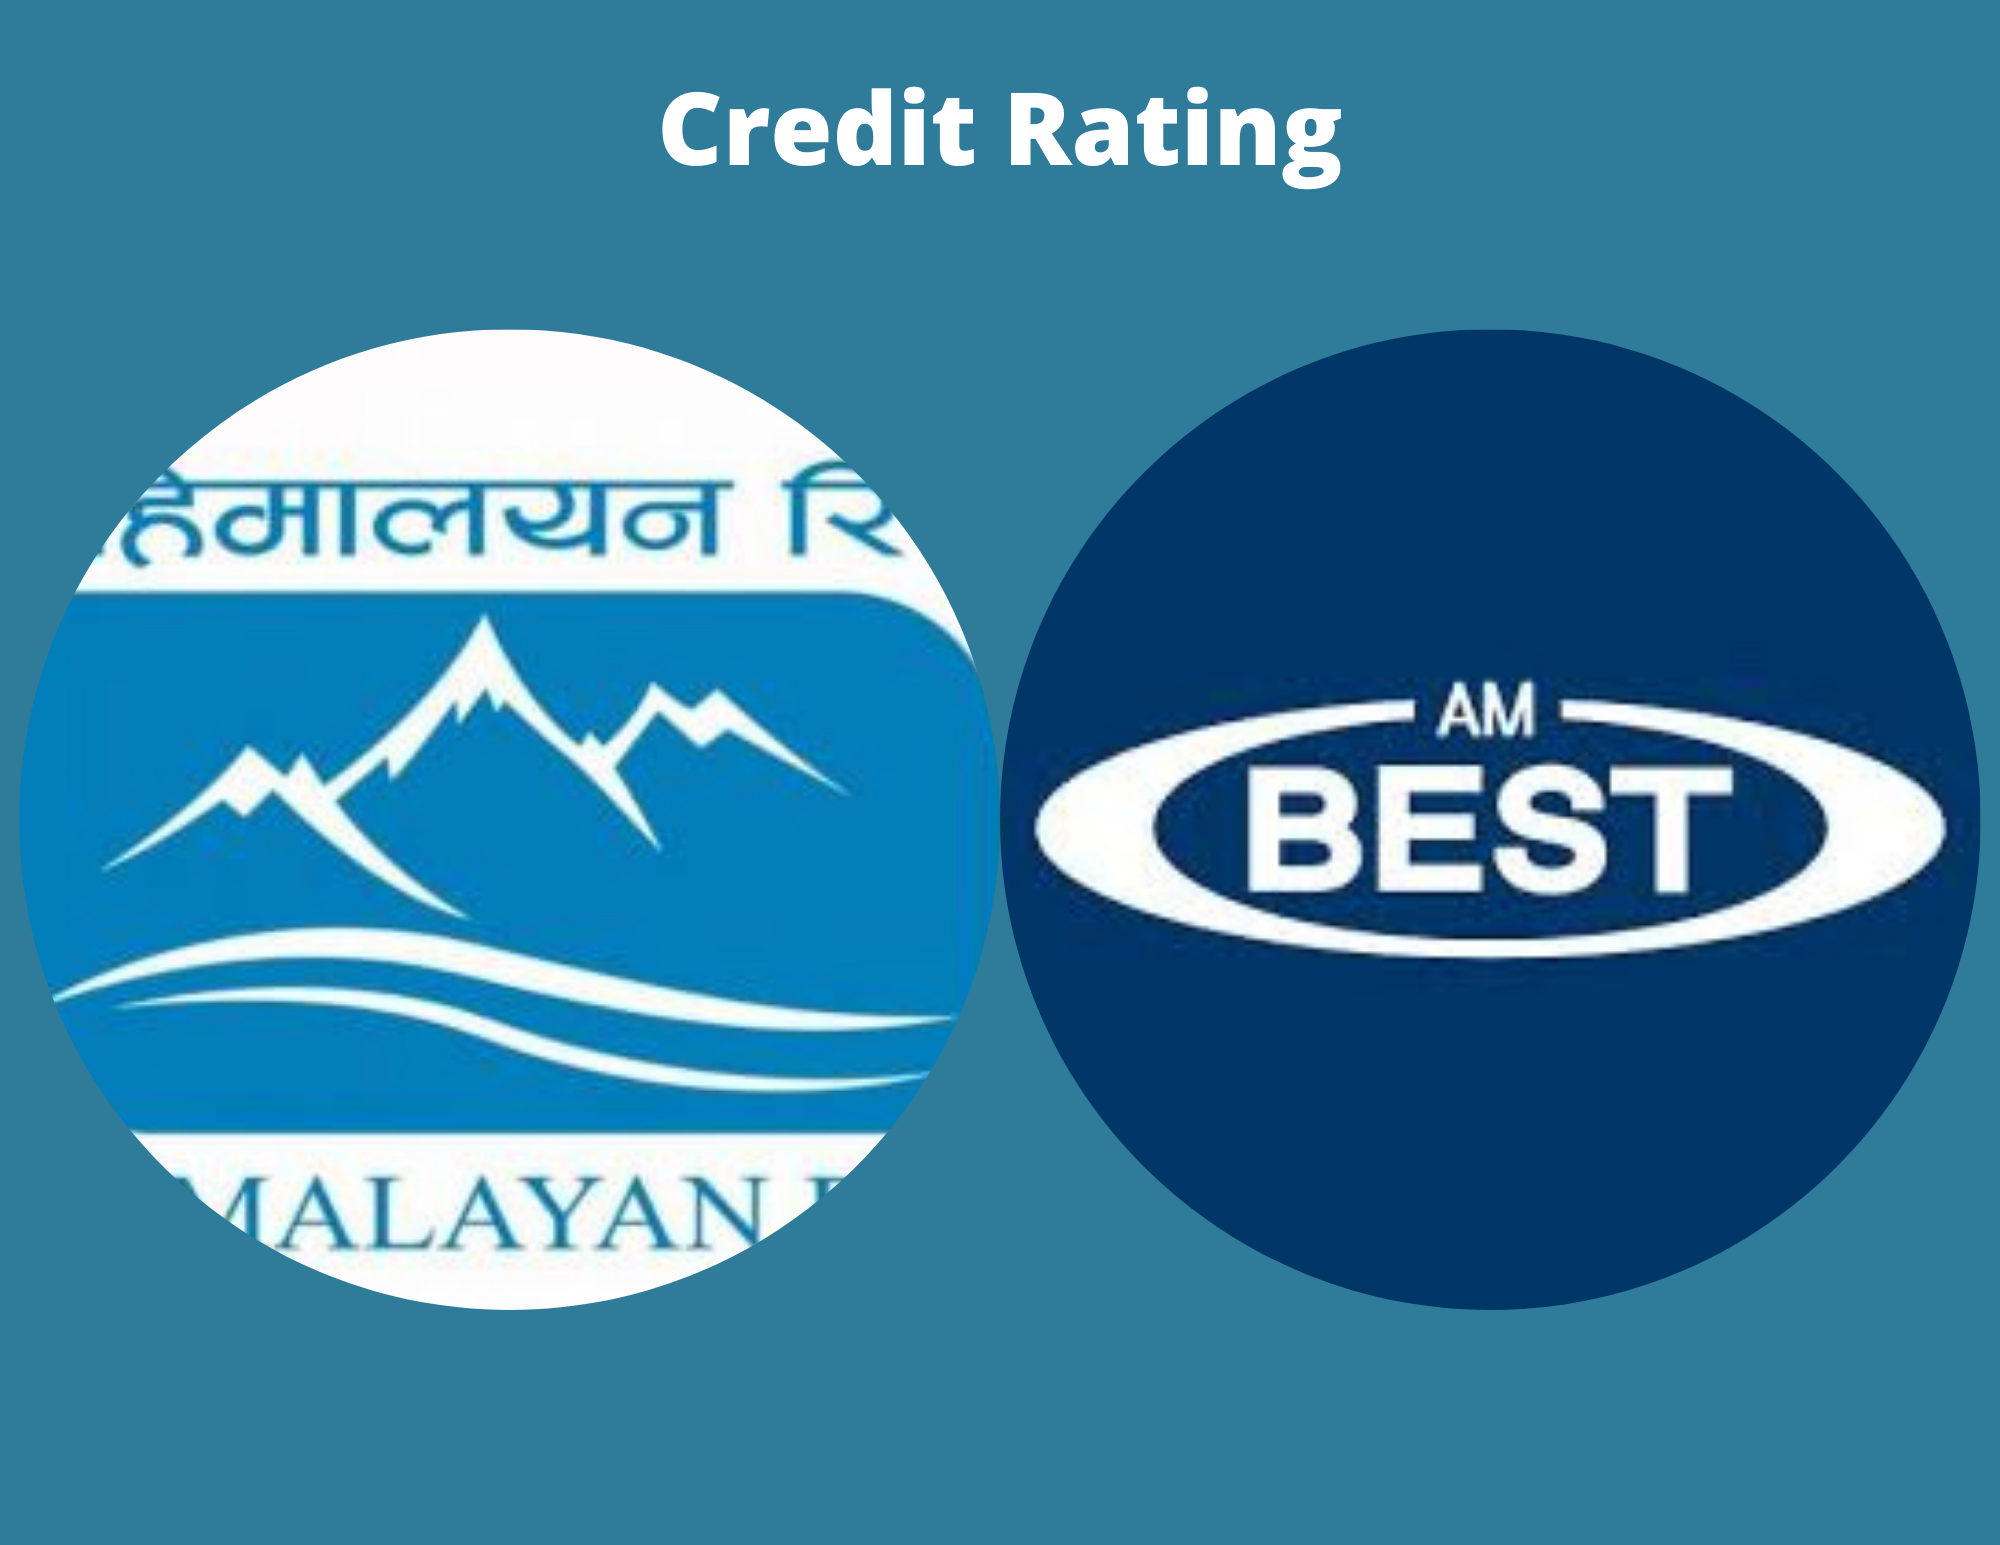 Himalayan Re prepares for Credit Rating, Awards contract to AM Best